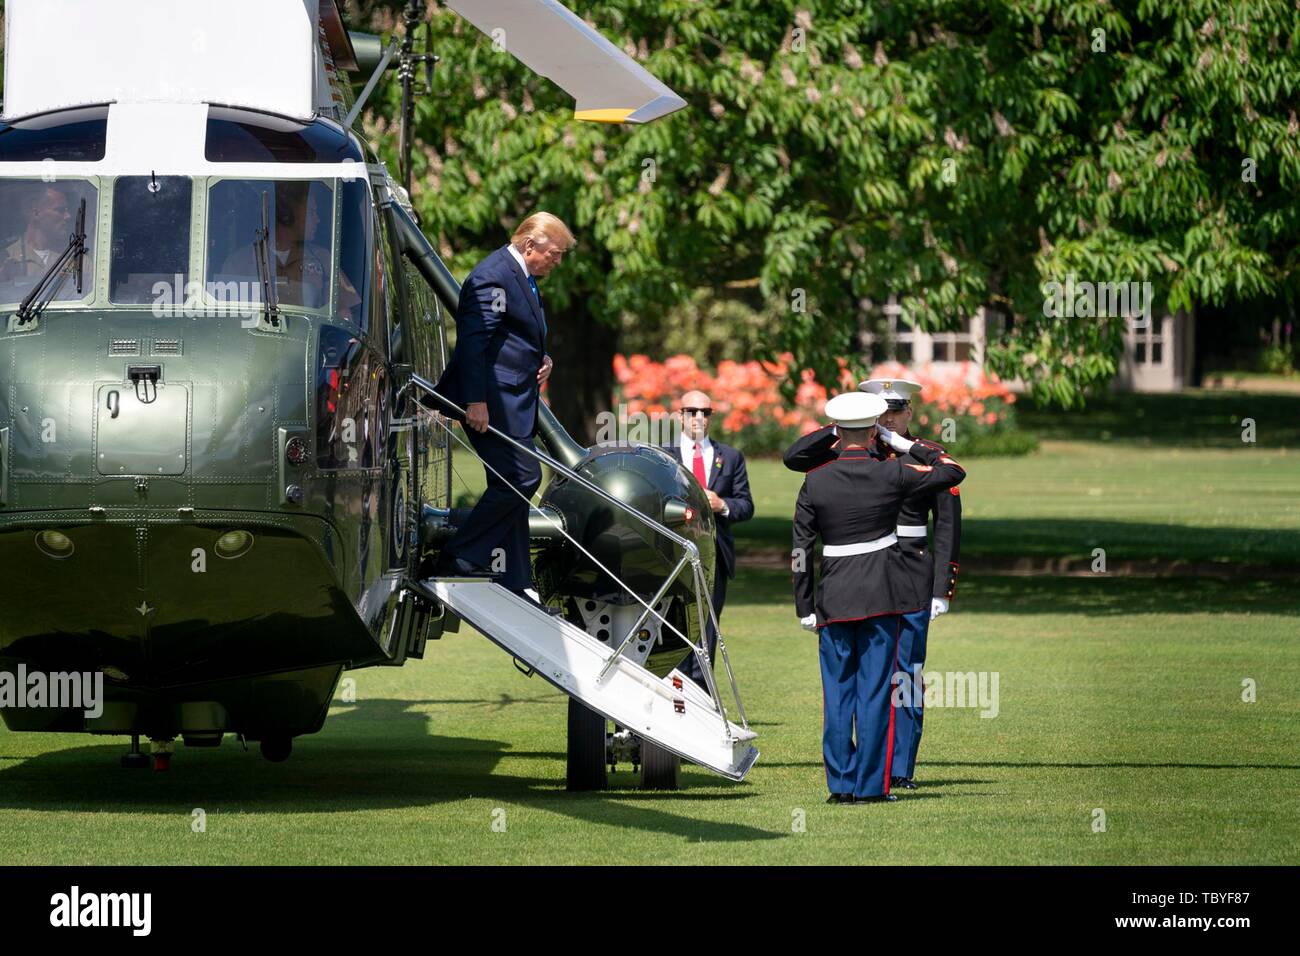 London, UK. 03rd June, 2019. U.S President Donald Trump steps off Marine One helicopter on arrival at Buckingham Palace for the official welcome ceremony June 3, 2019 in London, England. Credit: Planetpix/Alamy Live News Stock Photo